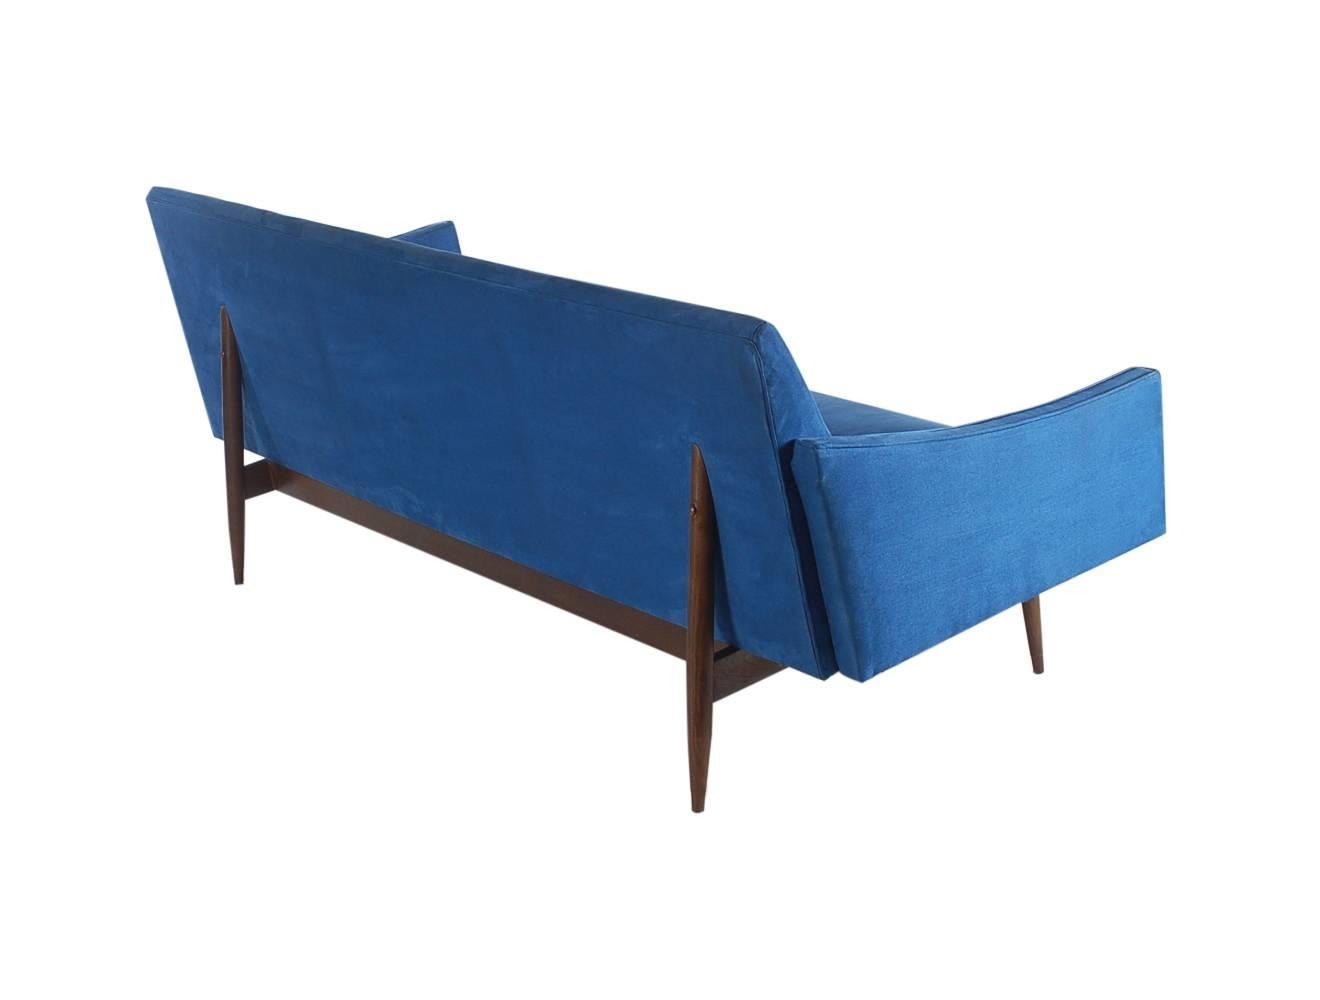 A very handsome Italian sofa with super sexy design lines. It features tapered walnut legs, swooping arm rests, and blue suede upholstery.

In the style of: Gio Ponto or Ico Parisi.